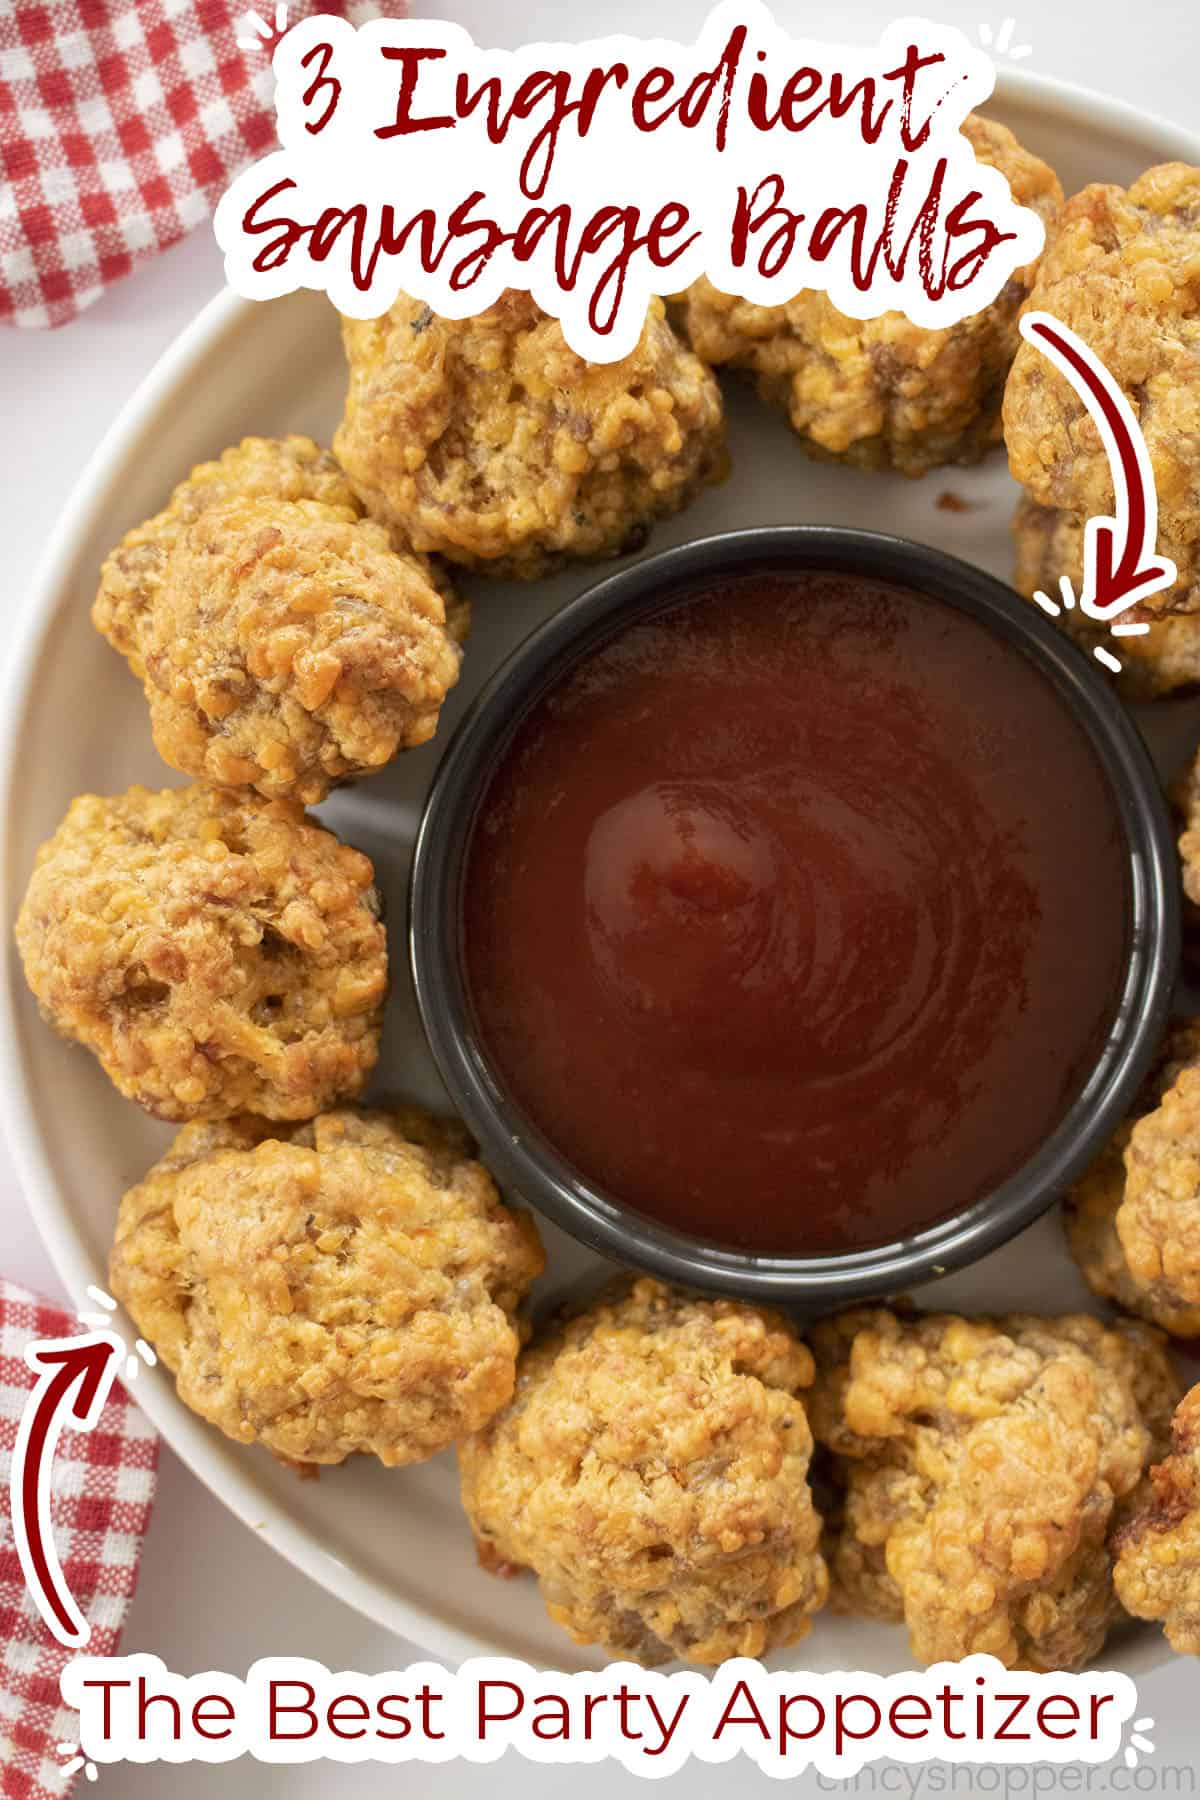 Text on image 3 Ingredient Sausage Balls The Best Party appetizer.